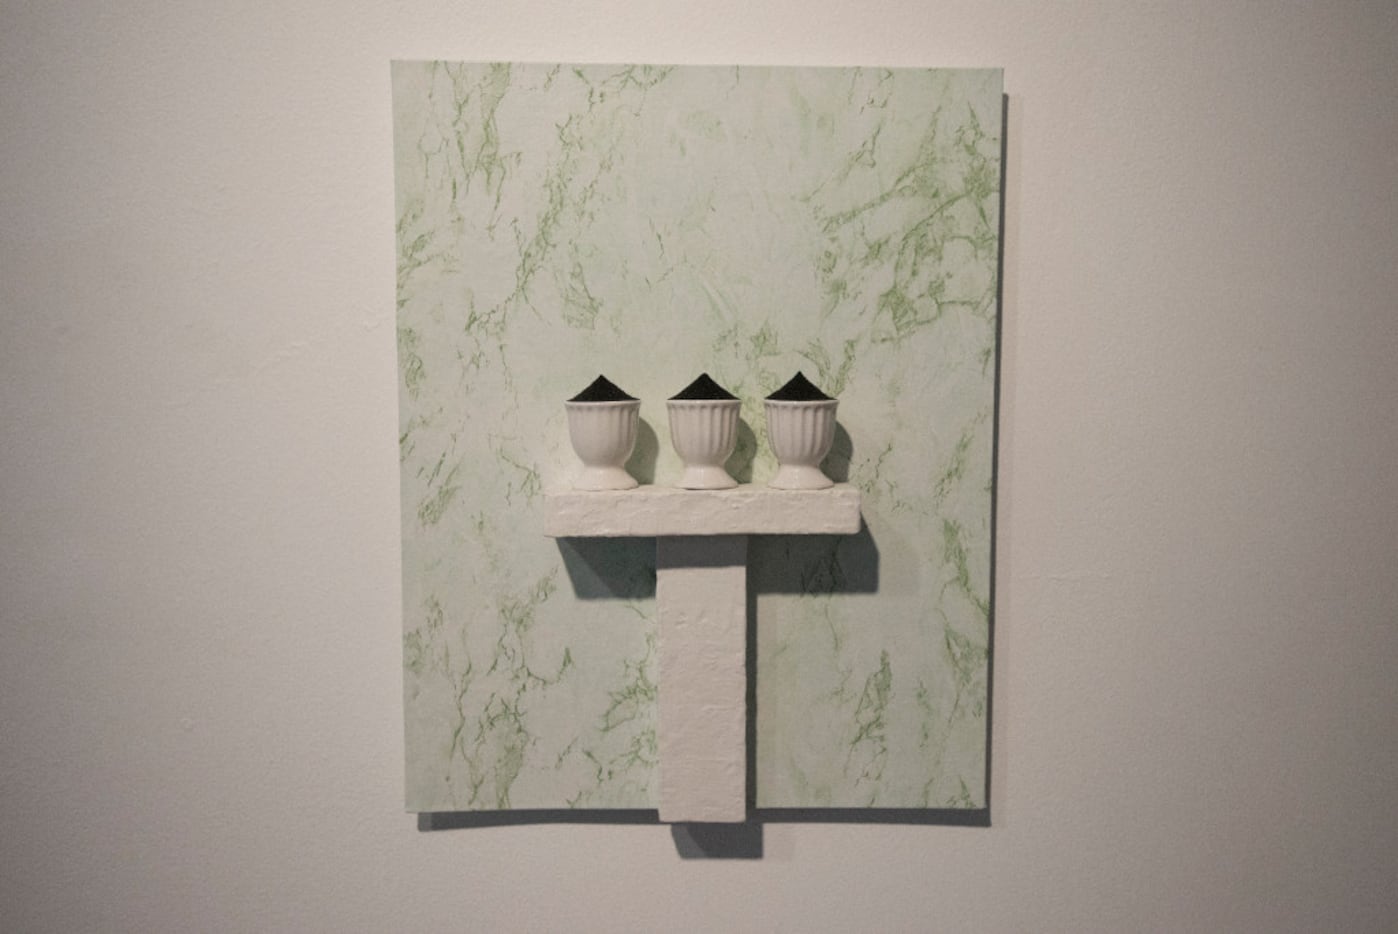 Andy Grotfeldt also created 3 Cups, a mixed media on a panel.